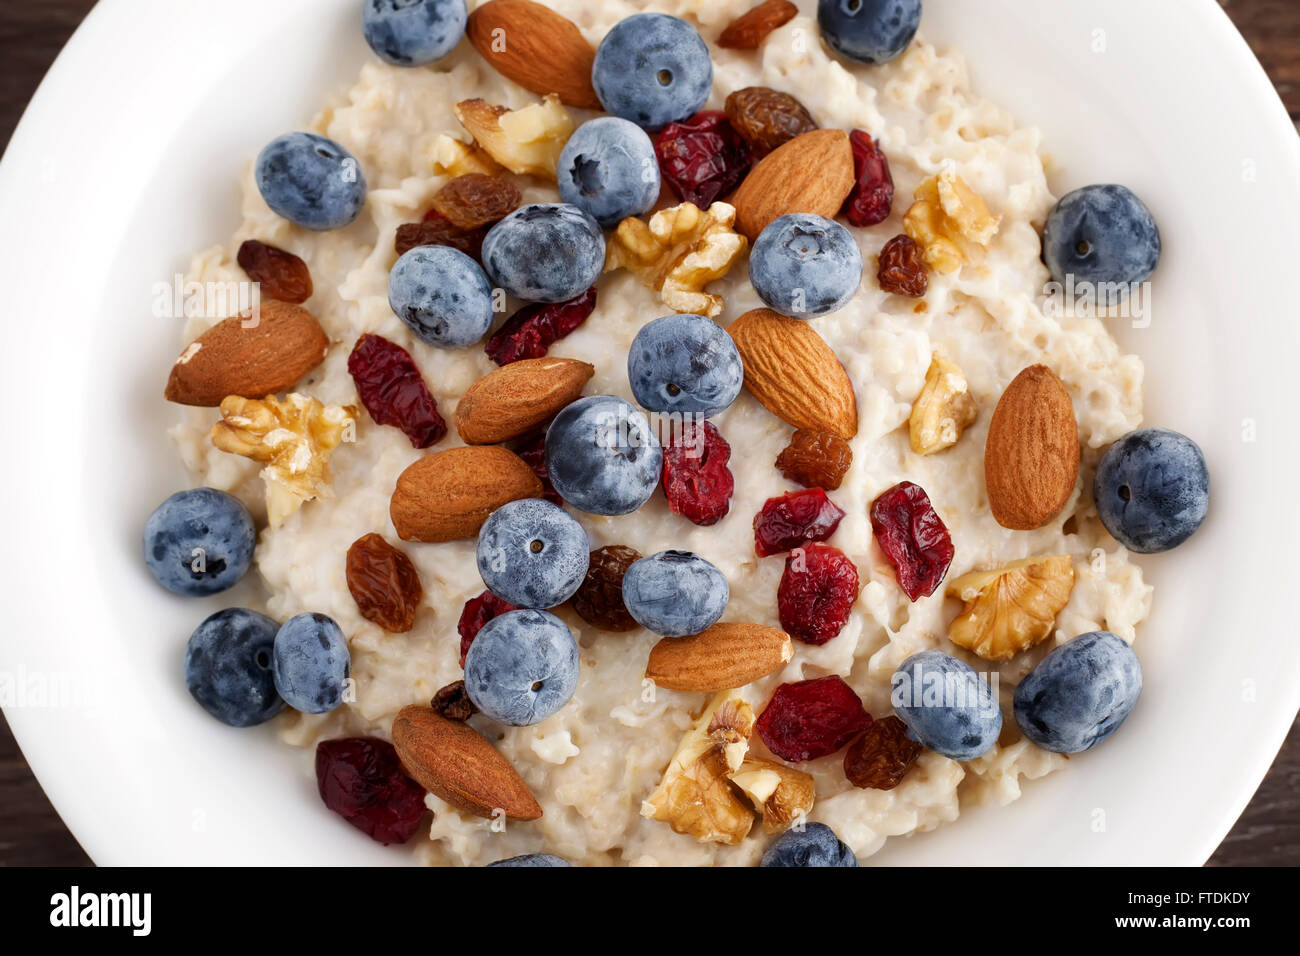 Porridge breakfast with blueberry, dried cranberries, almonds and walnuts. Stock Photo